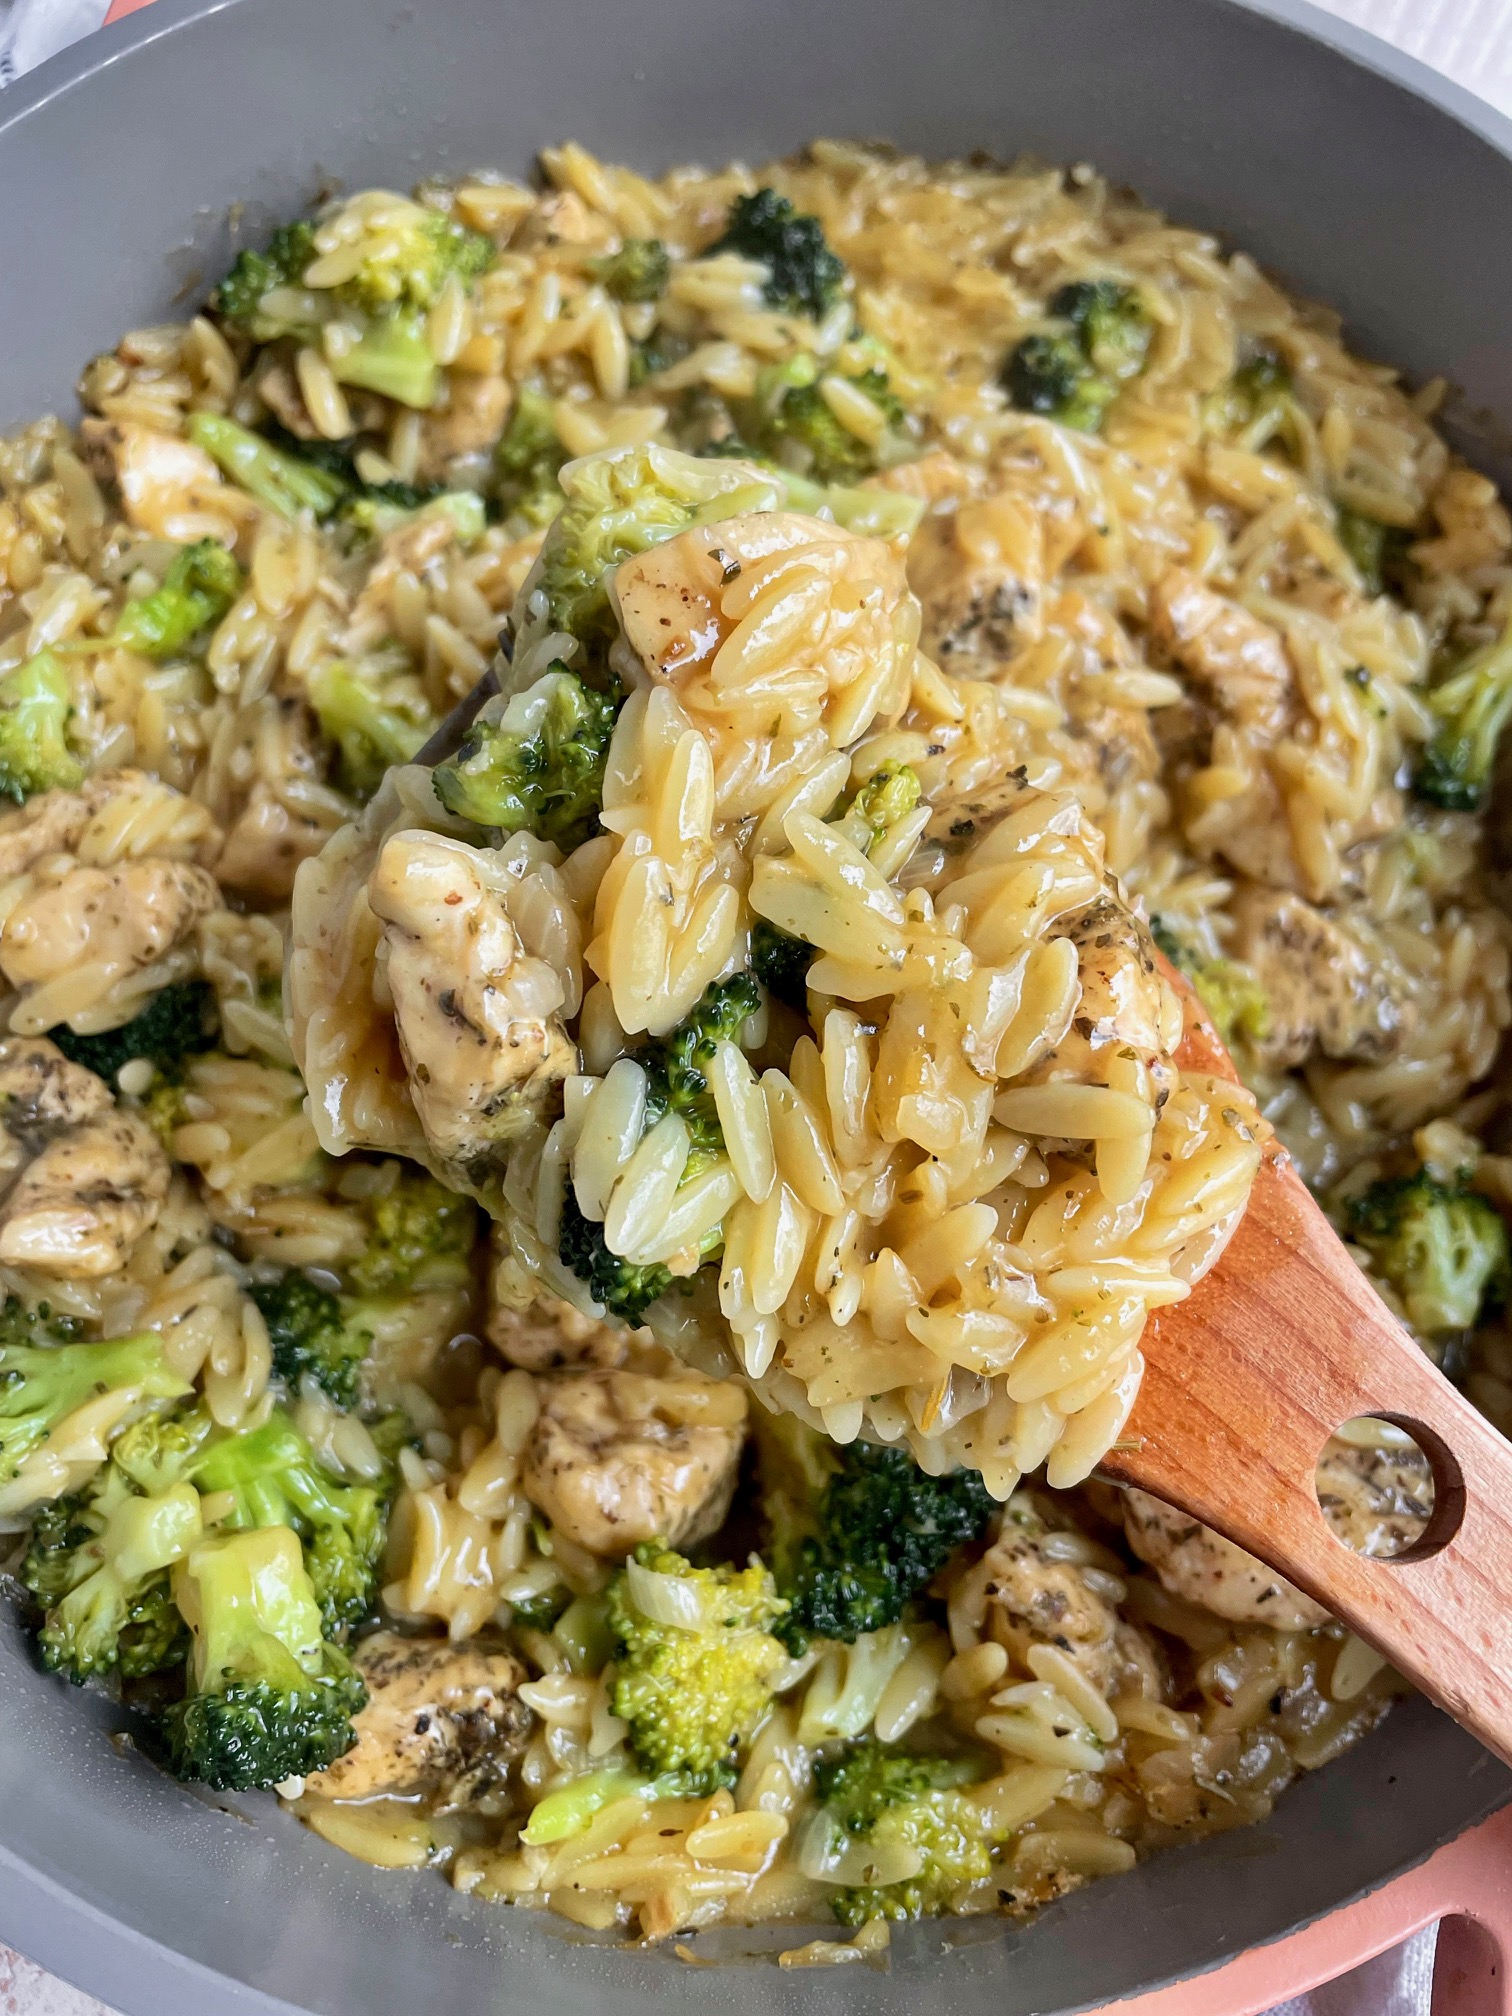 Some broccoli cheddar chicken orzo close up on a wooden spoon to show detail.